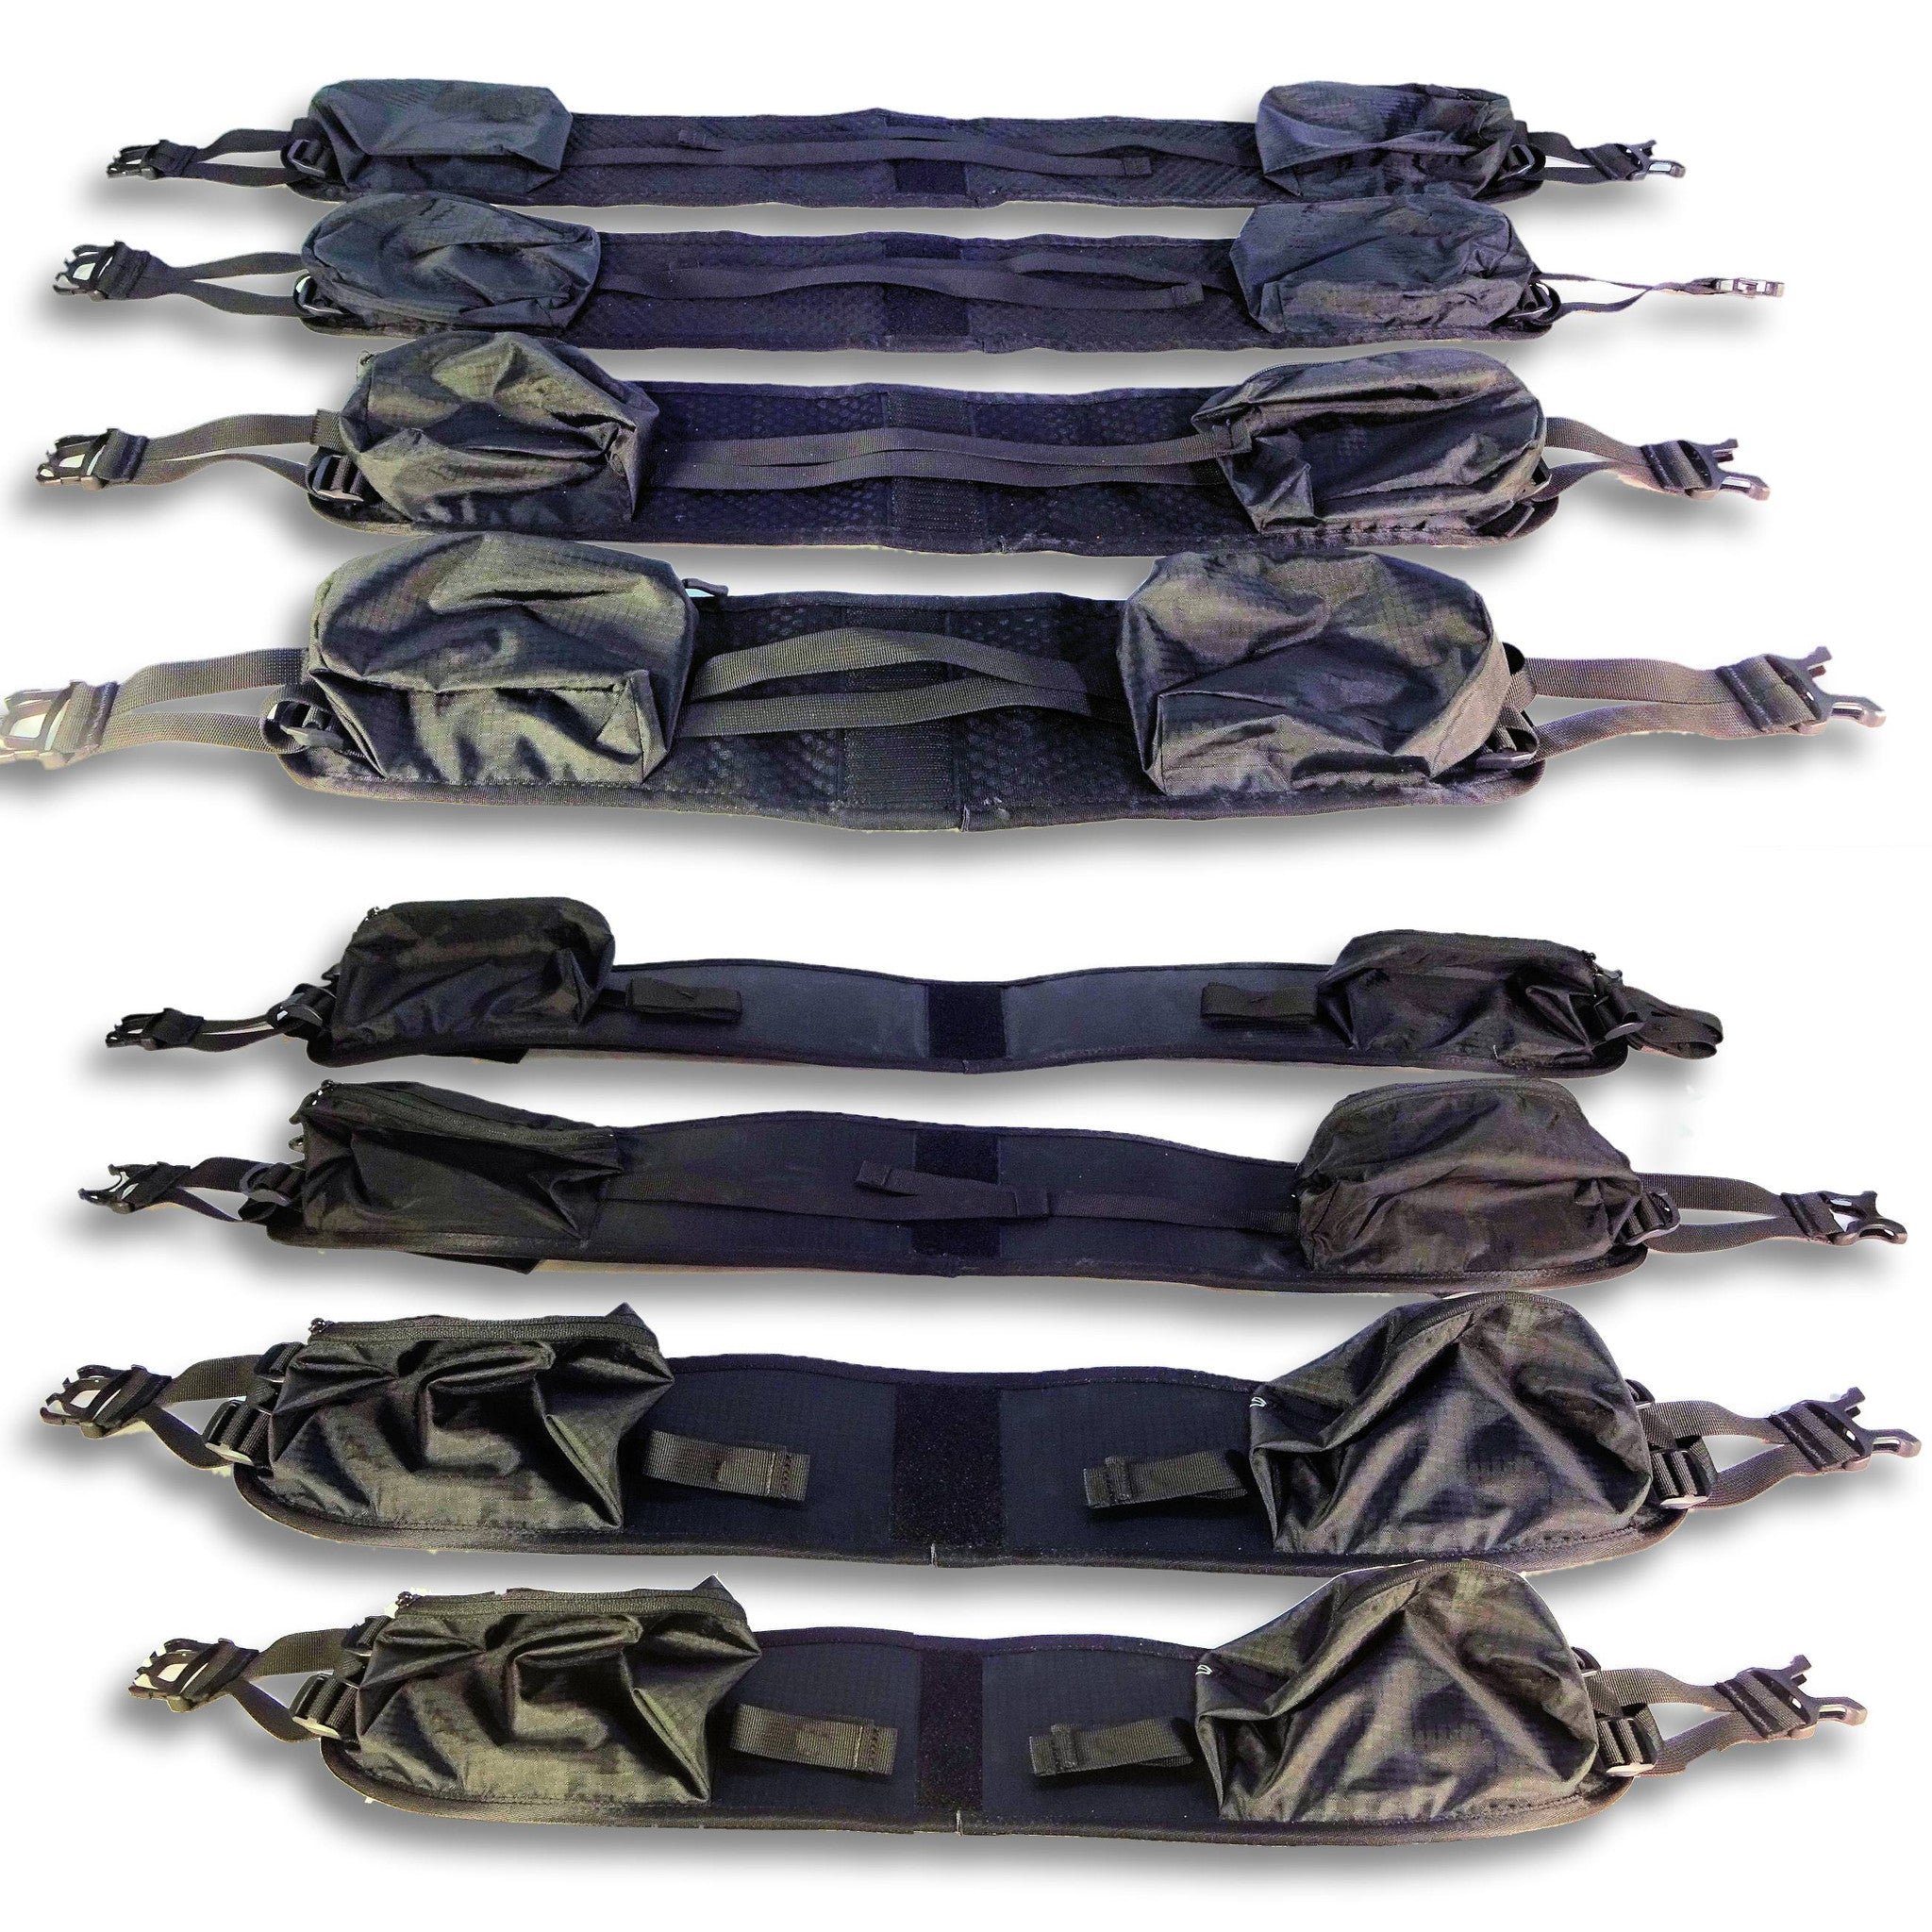 All sizes of the hip belts